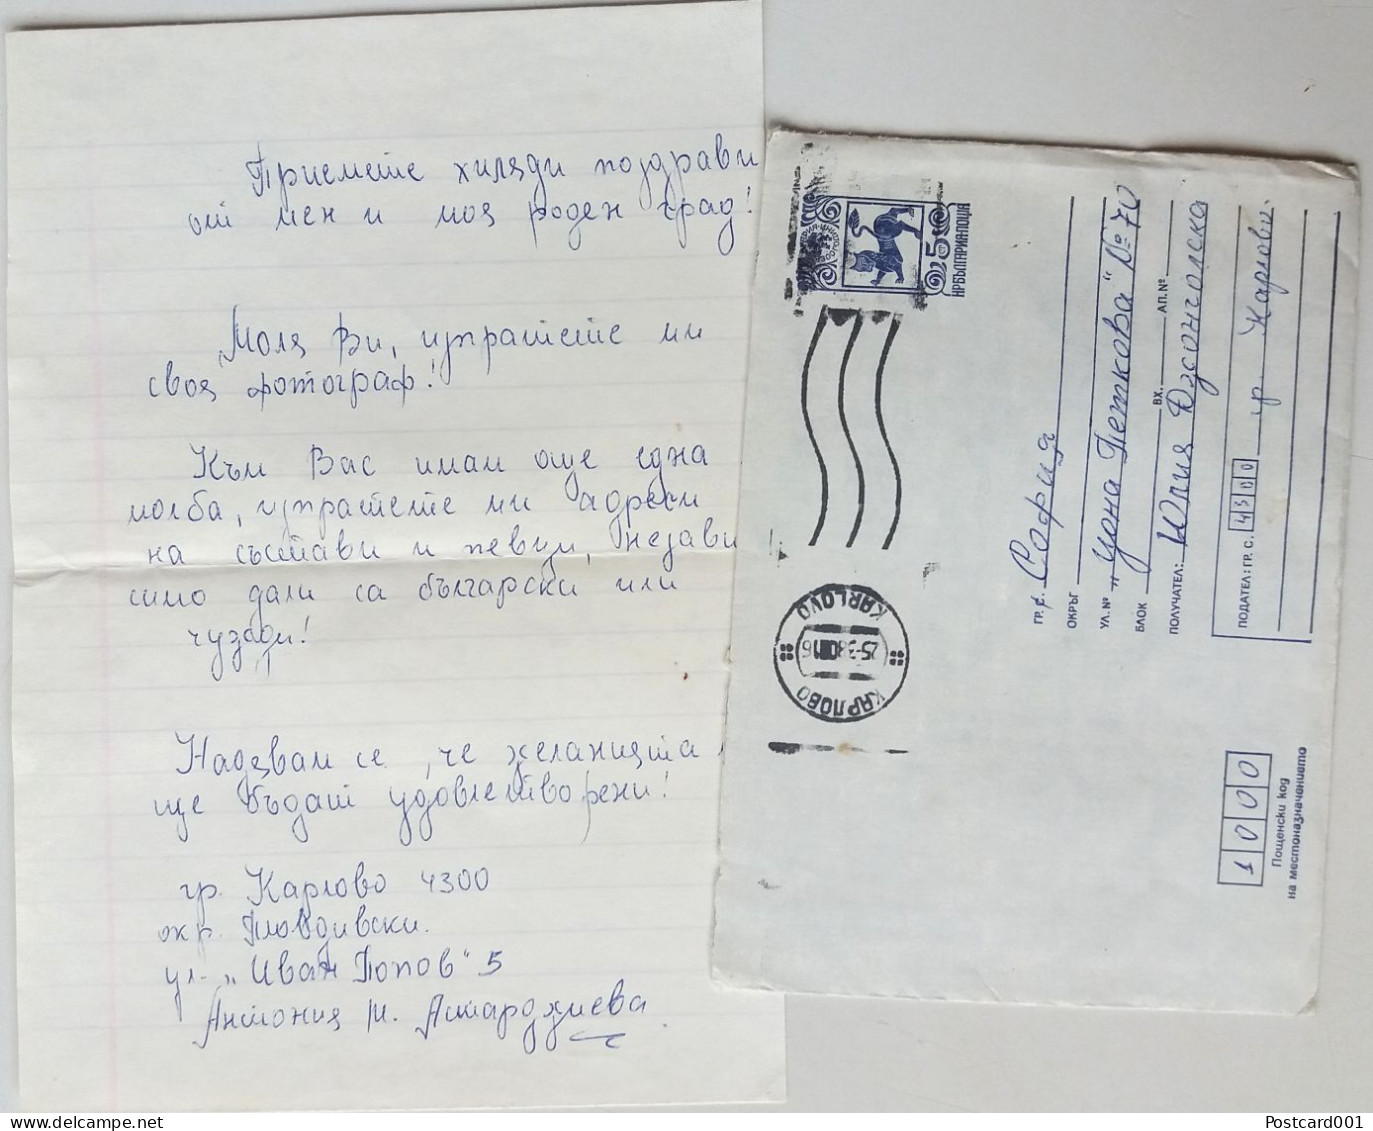 63 Traveled Envelope And Letter Cyrillic Manuscript Bulgaria 1980 - Local Mail - Covers & Documents